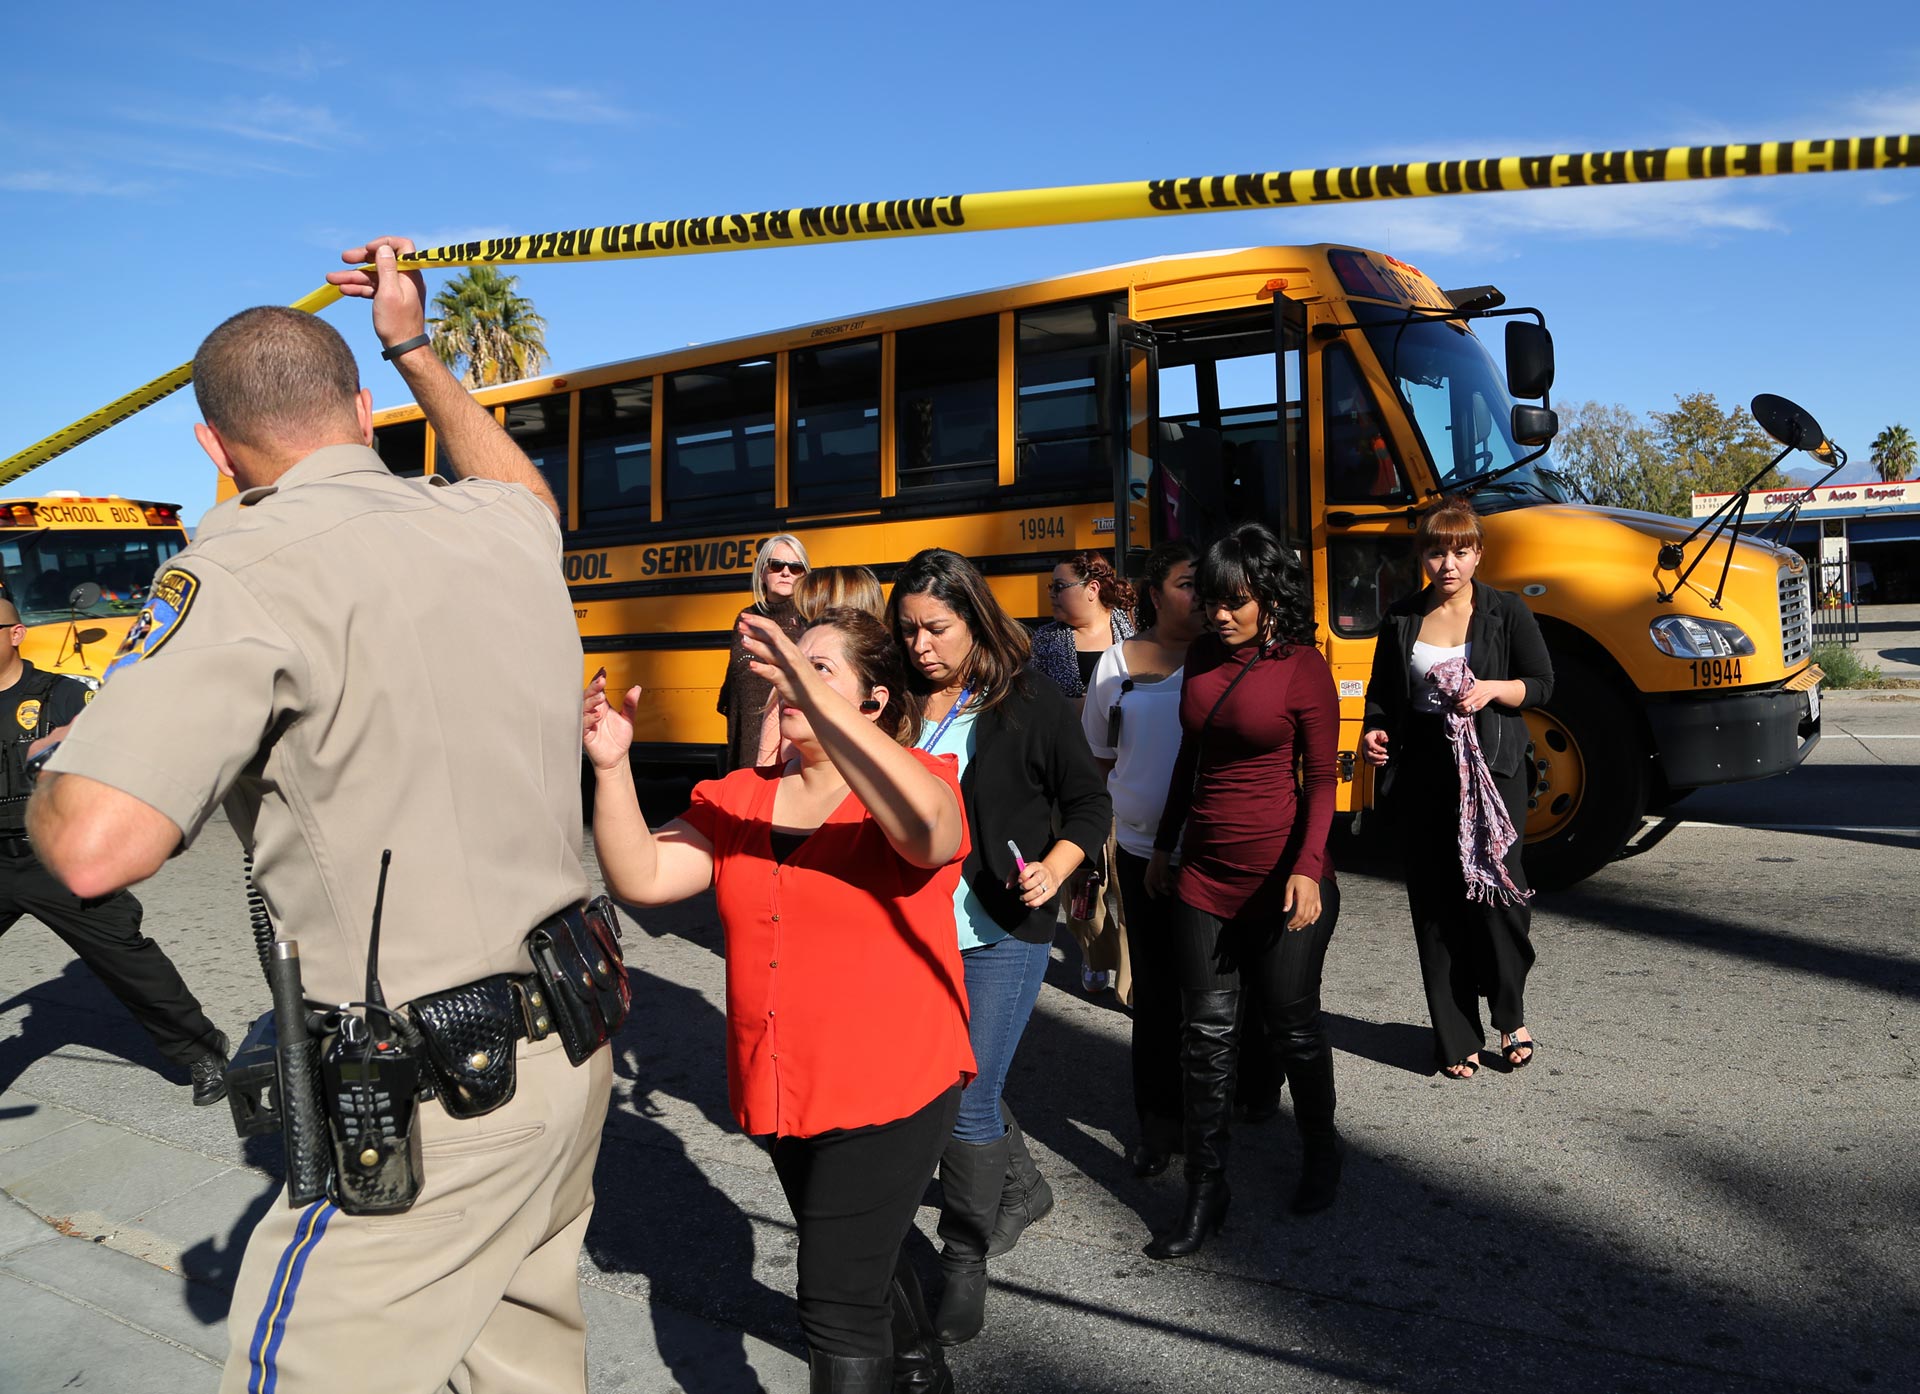 Employees and others are evacuated by bus from the site of a mass shooting at the Inland Regional Center in San Bernardino.